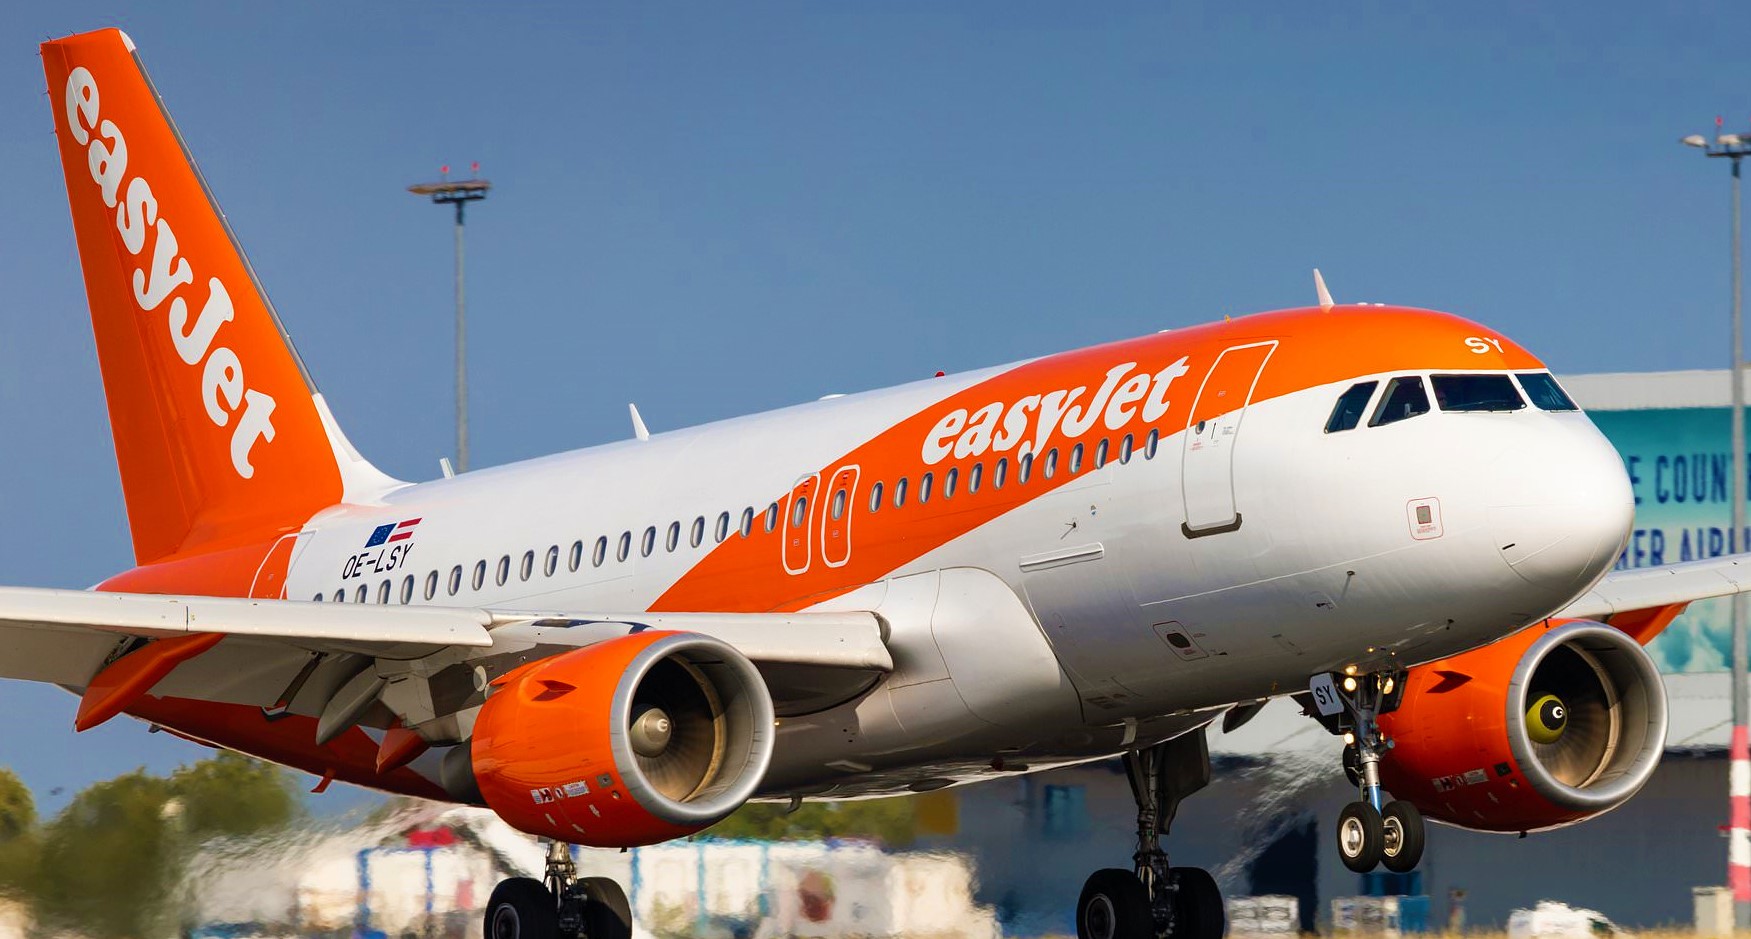 EasyJet is Recruiting For Crew Base Manager and Aircraft Maintenance Roles at different Locations.